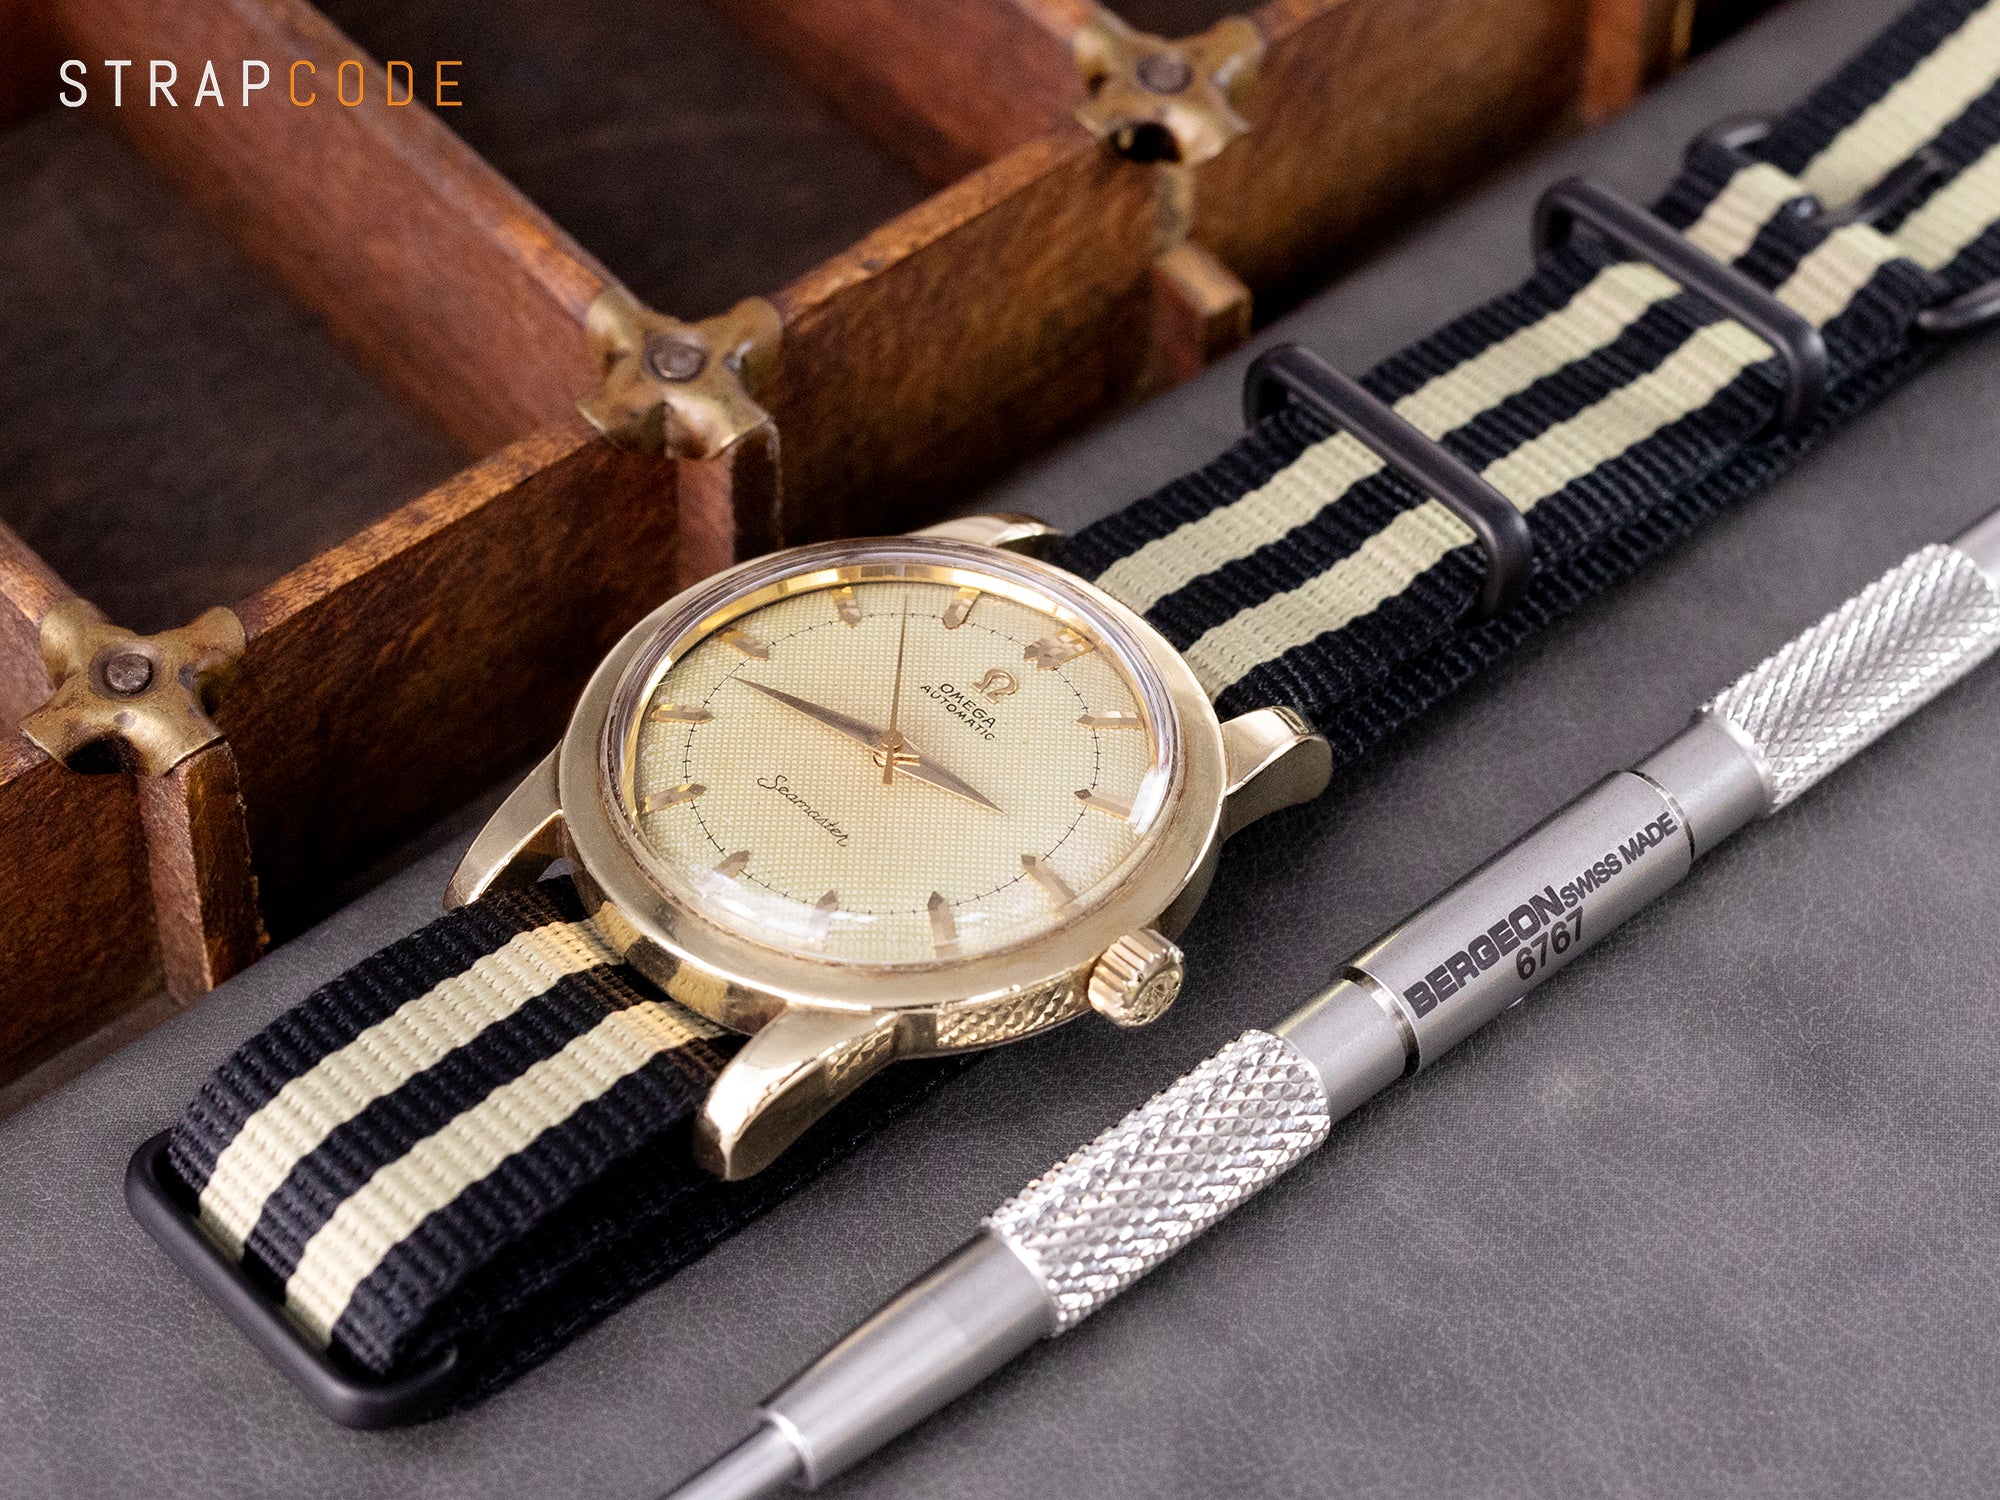 1952 Omega Gold Capped Seamaster with Bumper Caliber 354 Nato watch strap by Strapcode